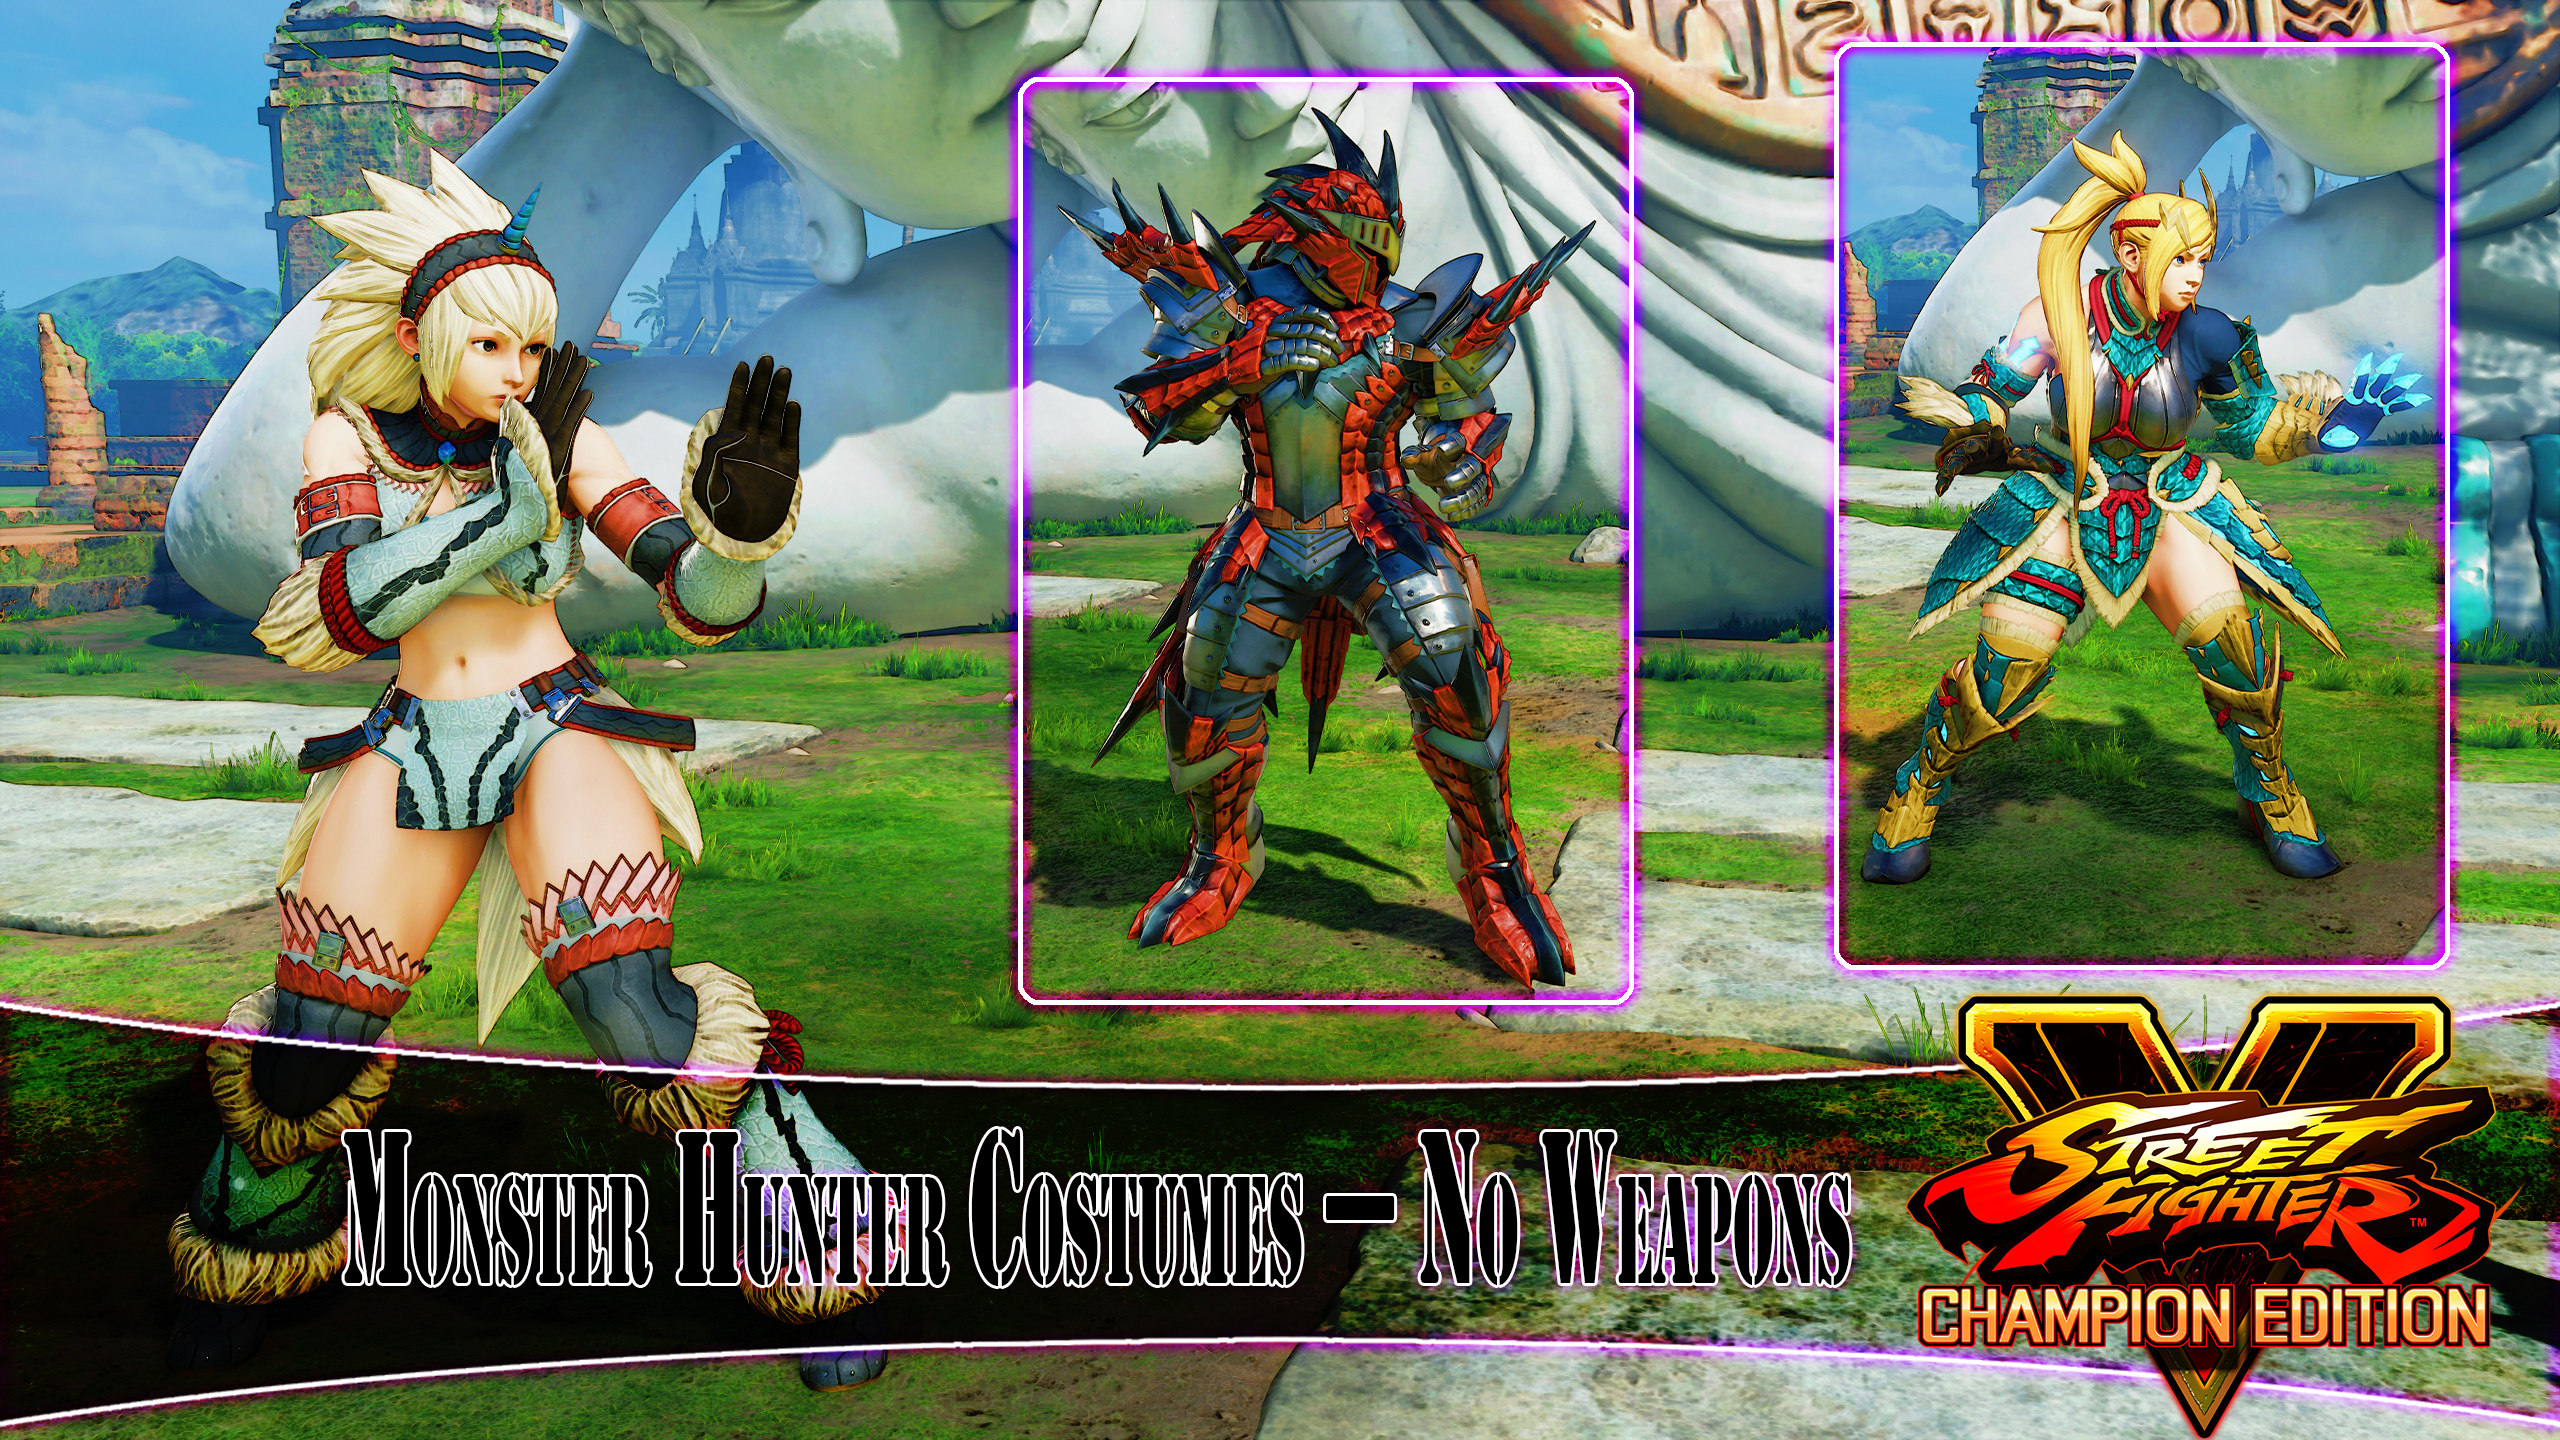 MOD] MONSTER HUNTER COSTUMES (NO WEAPONS) by DanteSDT on DeviantArt